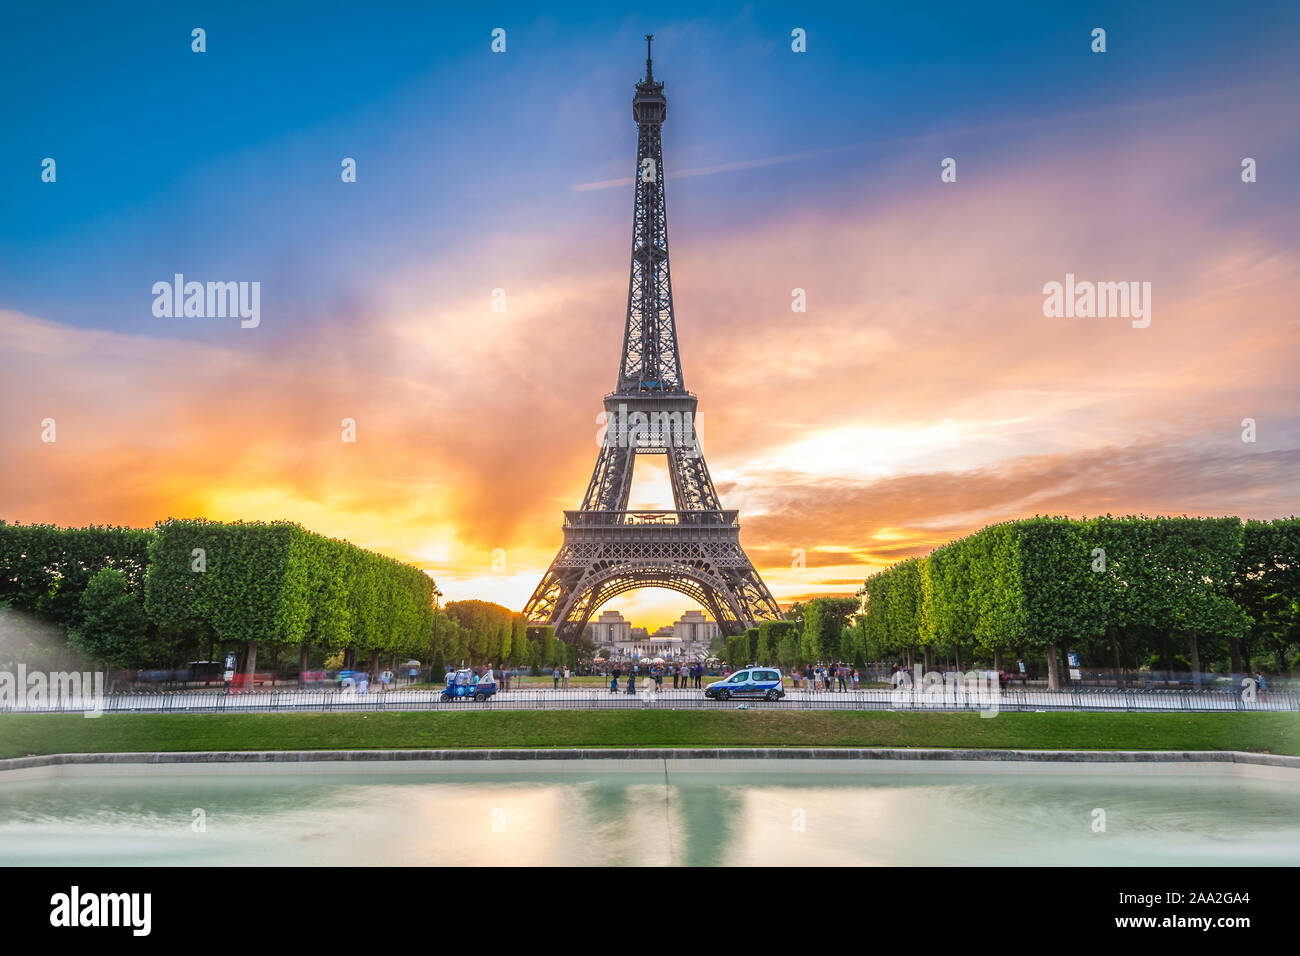 Eiffel Tower in Paris, France at dusk Stock Photo